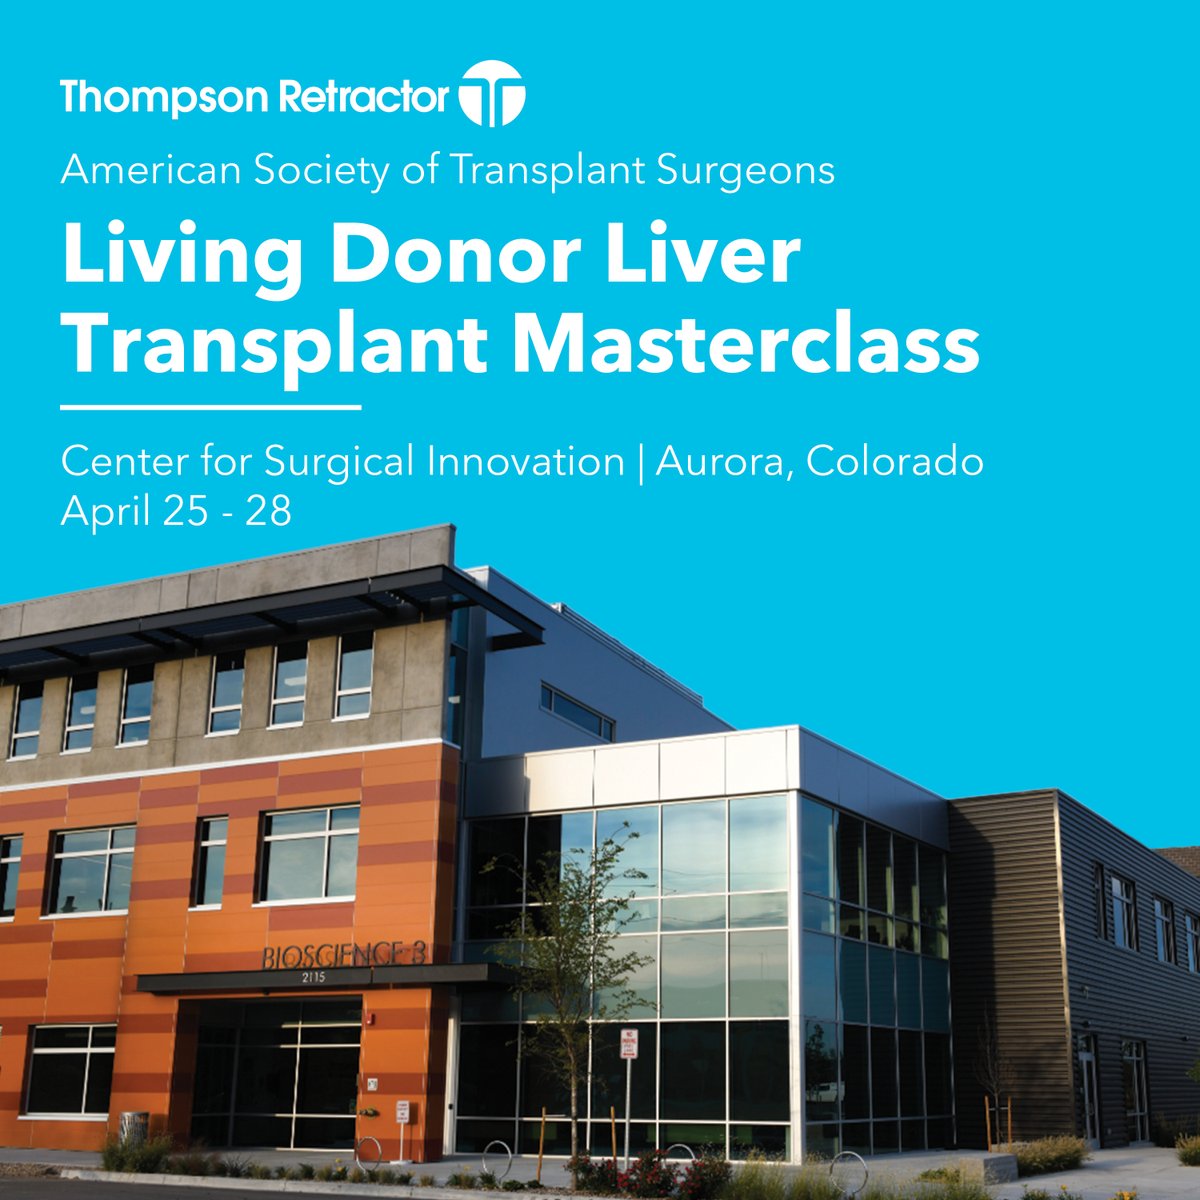 Back to the lab! We are excited to announce our partnership with the ASTS at their new Living Donor Liver Transplant Masterclass! The inaugural event will be held at the Center for Surgical Innovation in Colorado next week! Stay tuned for updates! #thompsonretractor #liverdonor